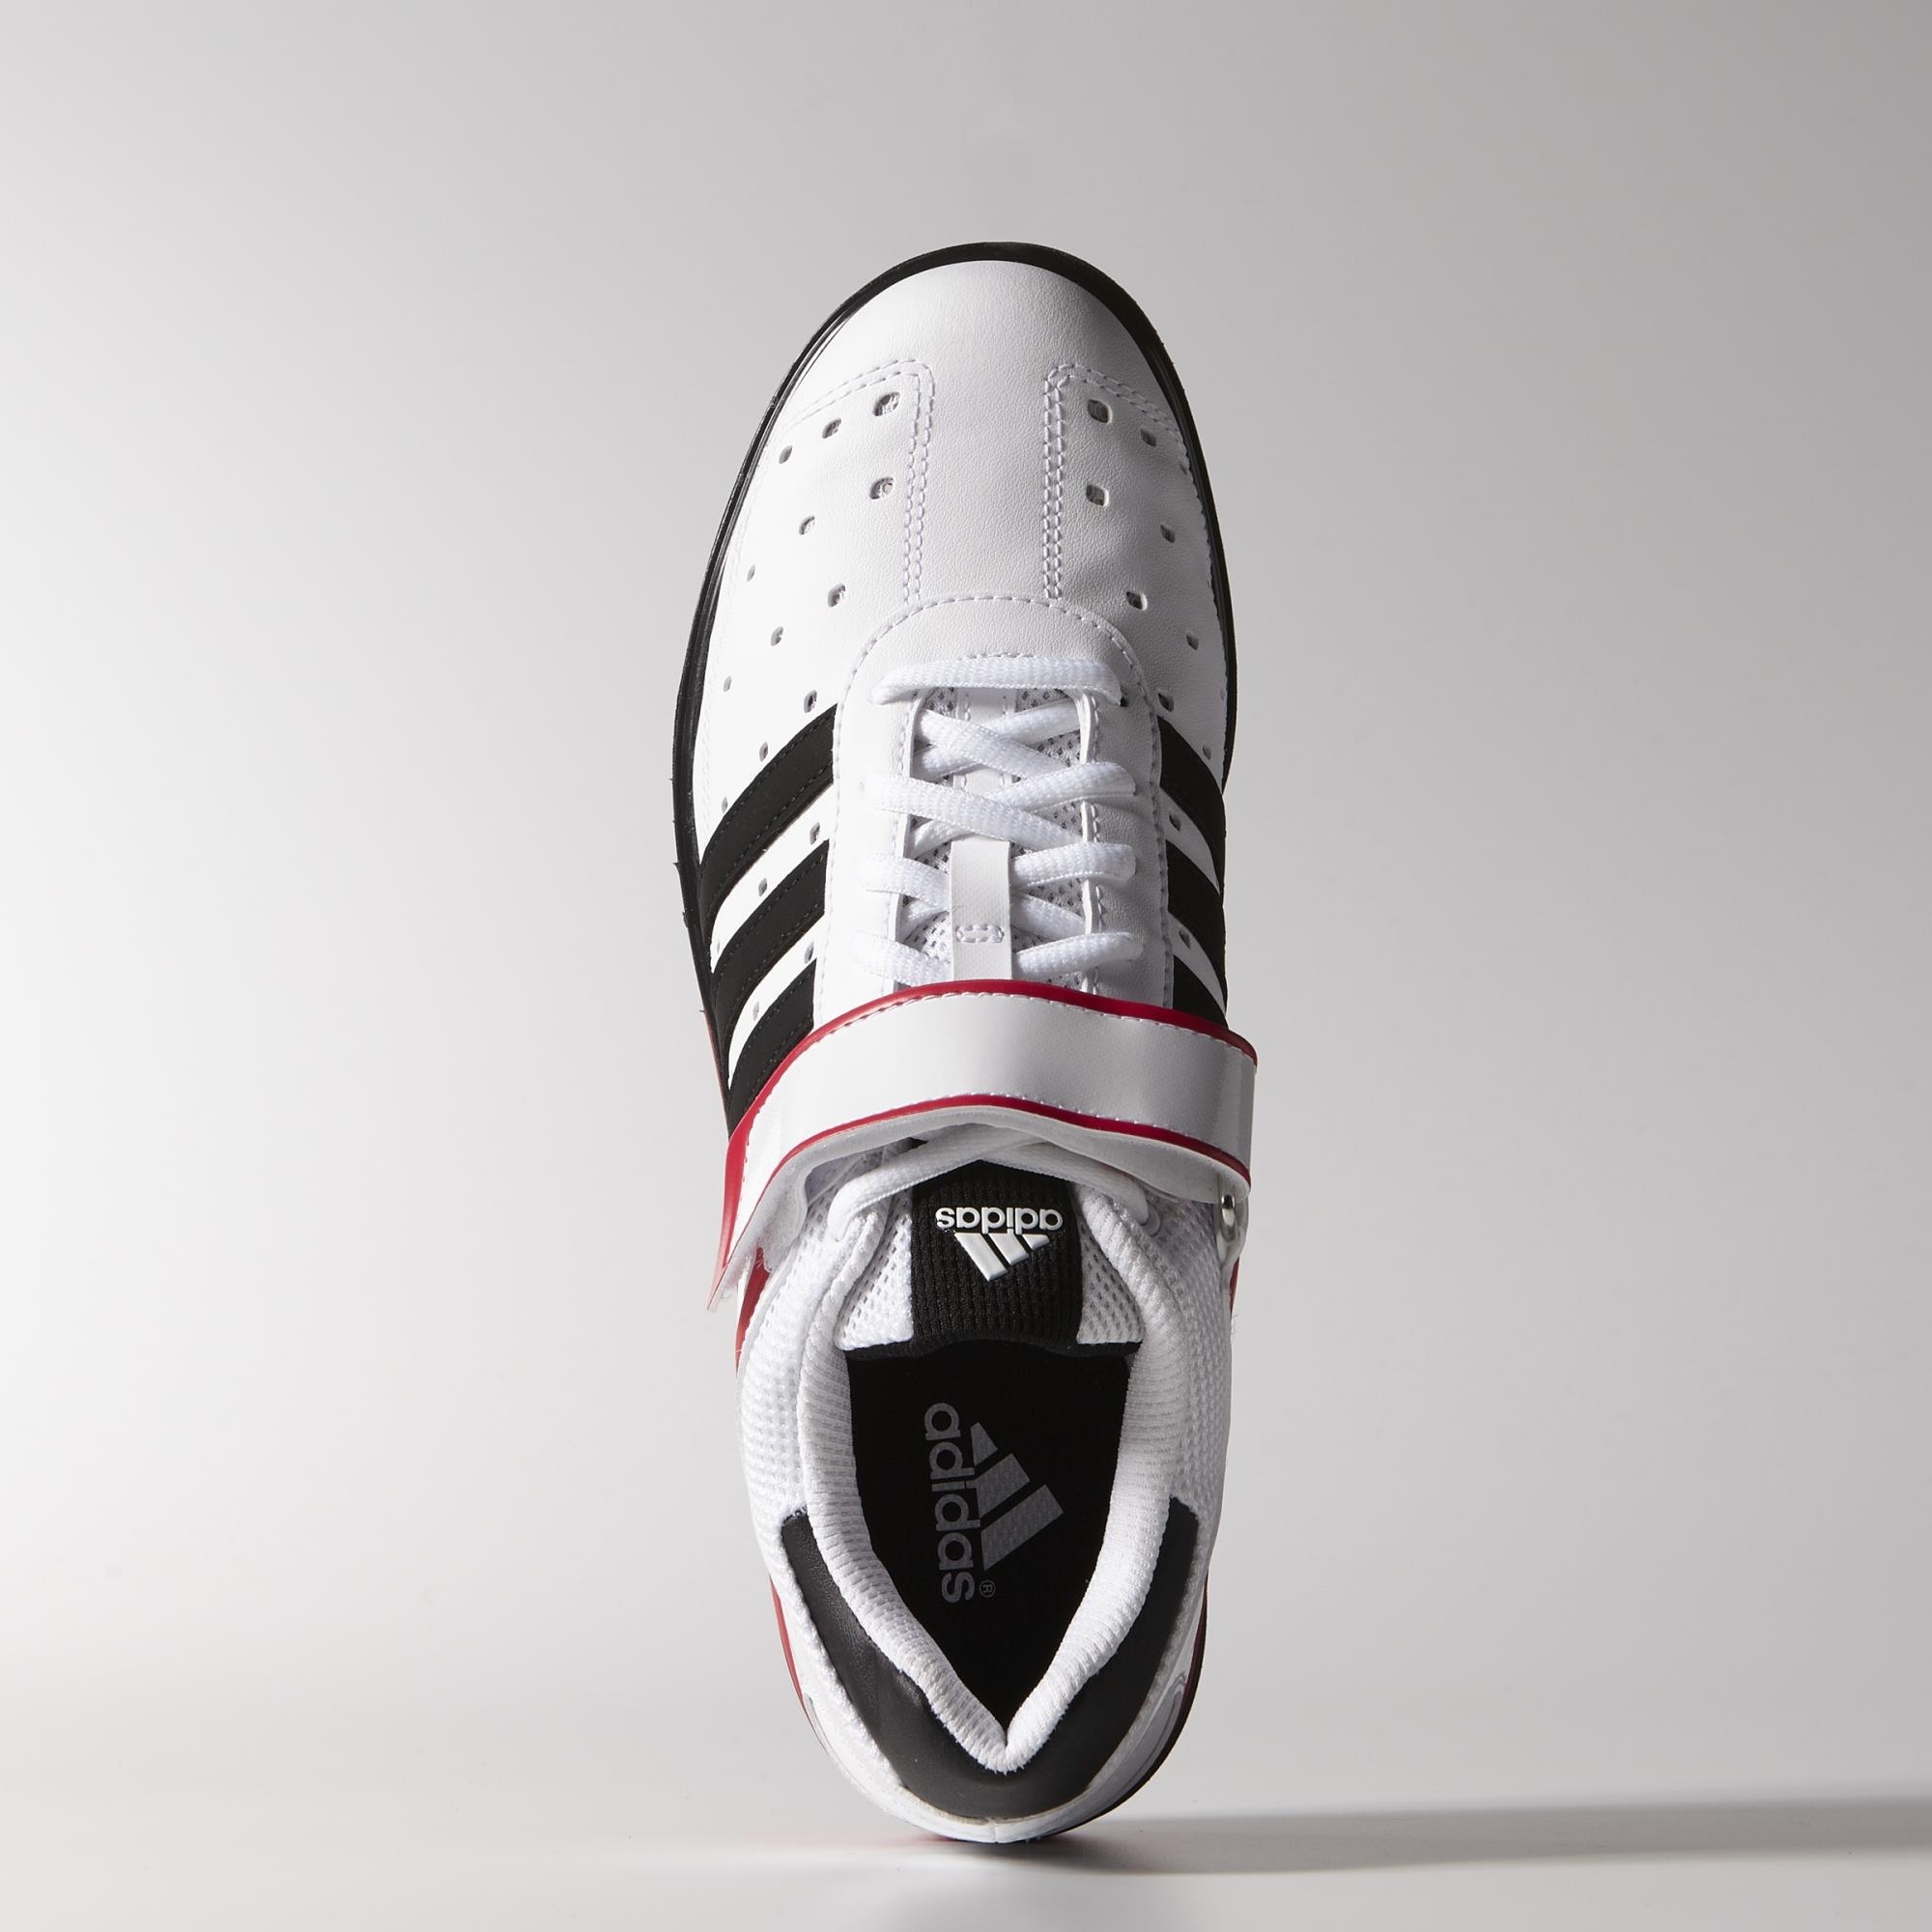 Adidas Weightlifting Powerperfect 2.0 up